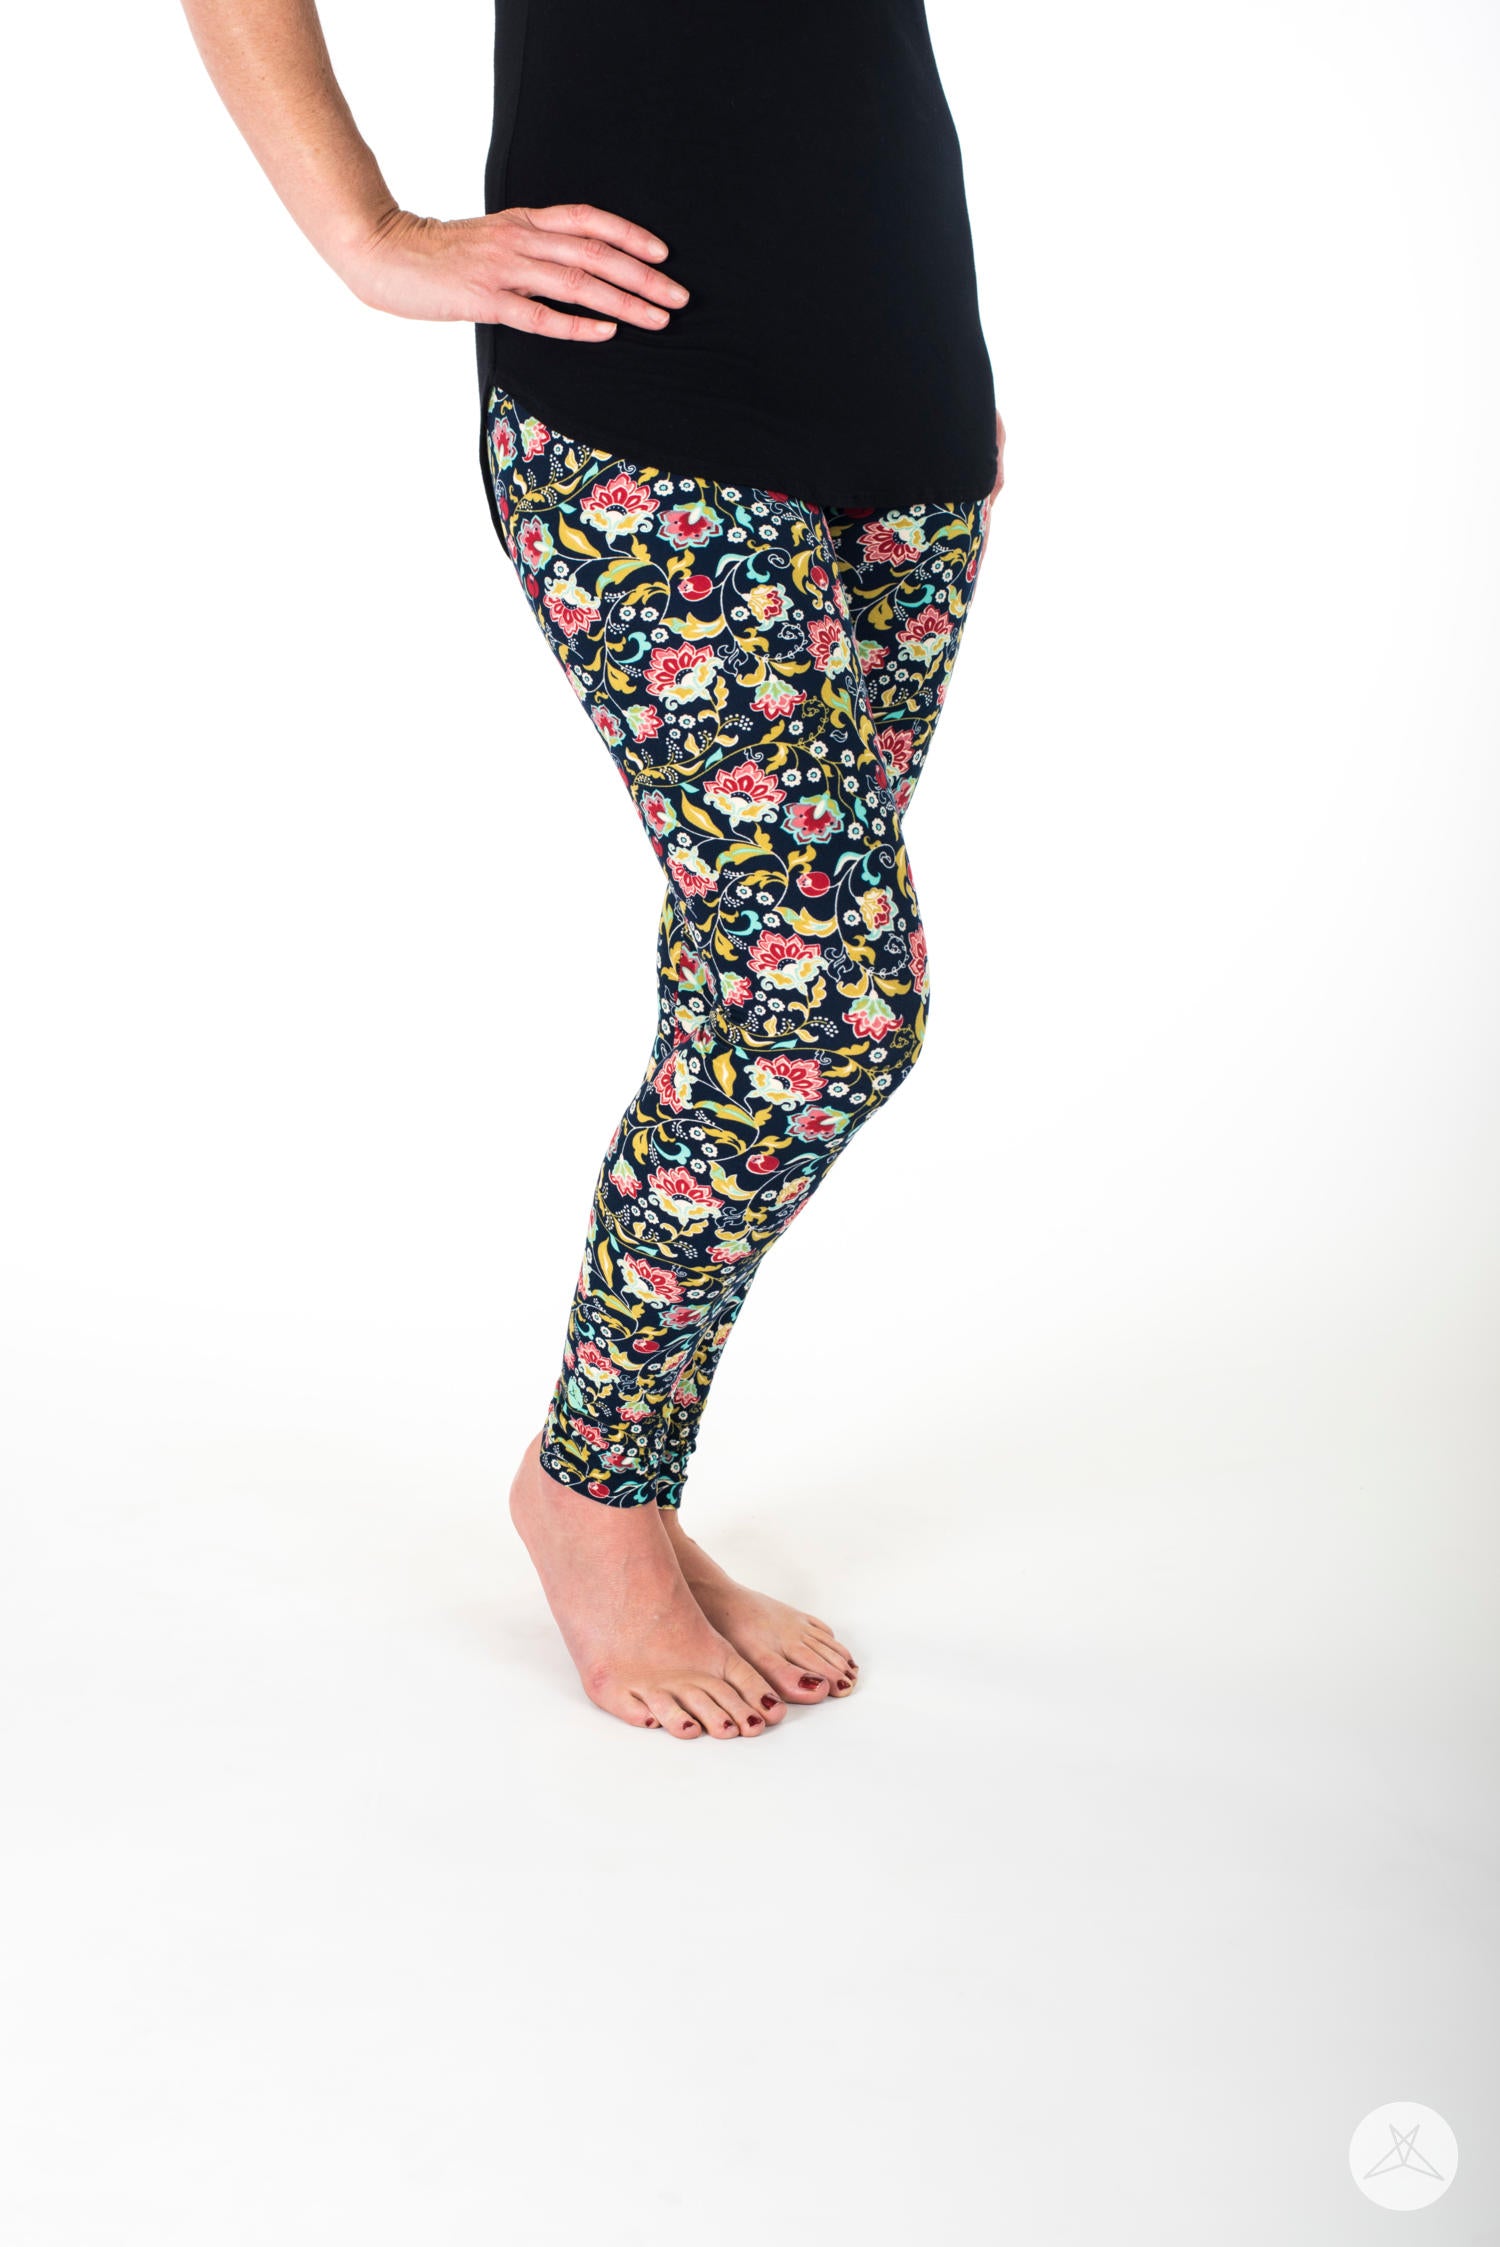 Shop in Style for your Daughter's Kids XL Leggings with Lularoe